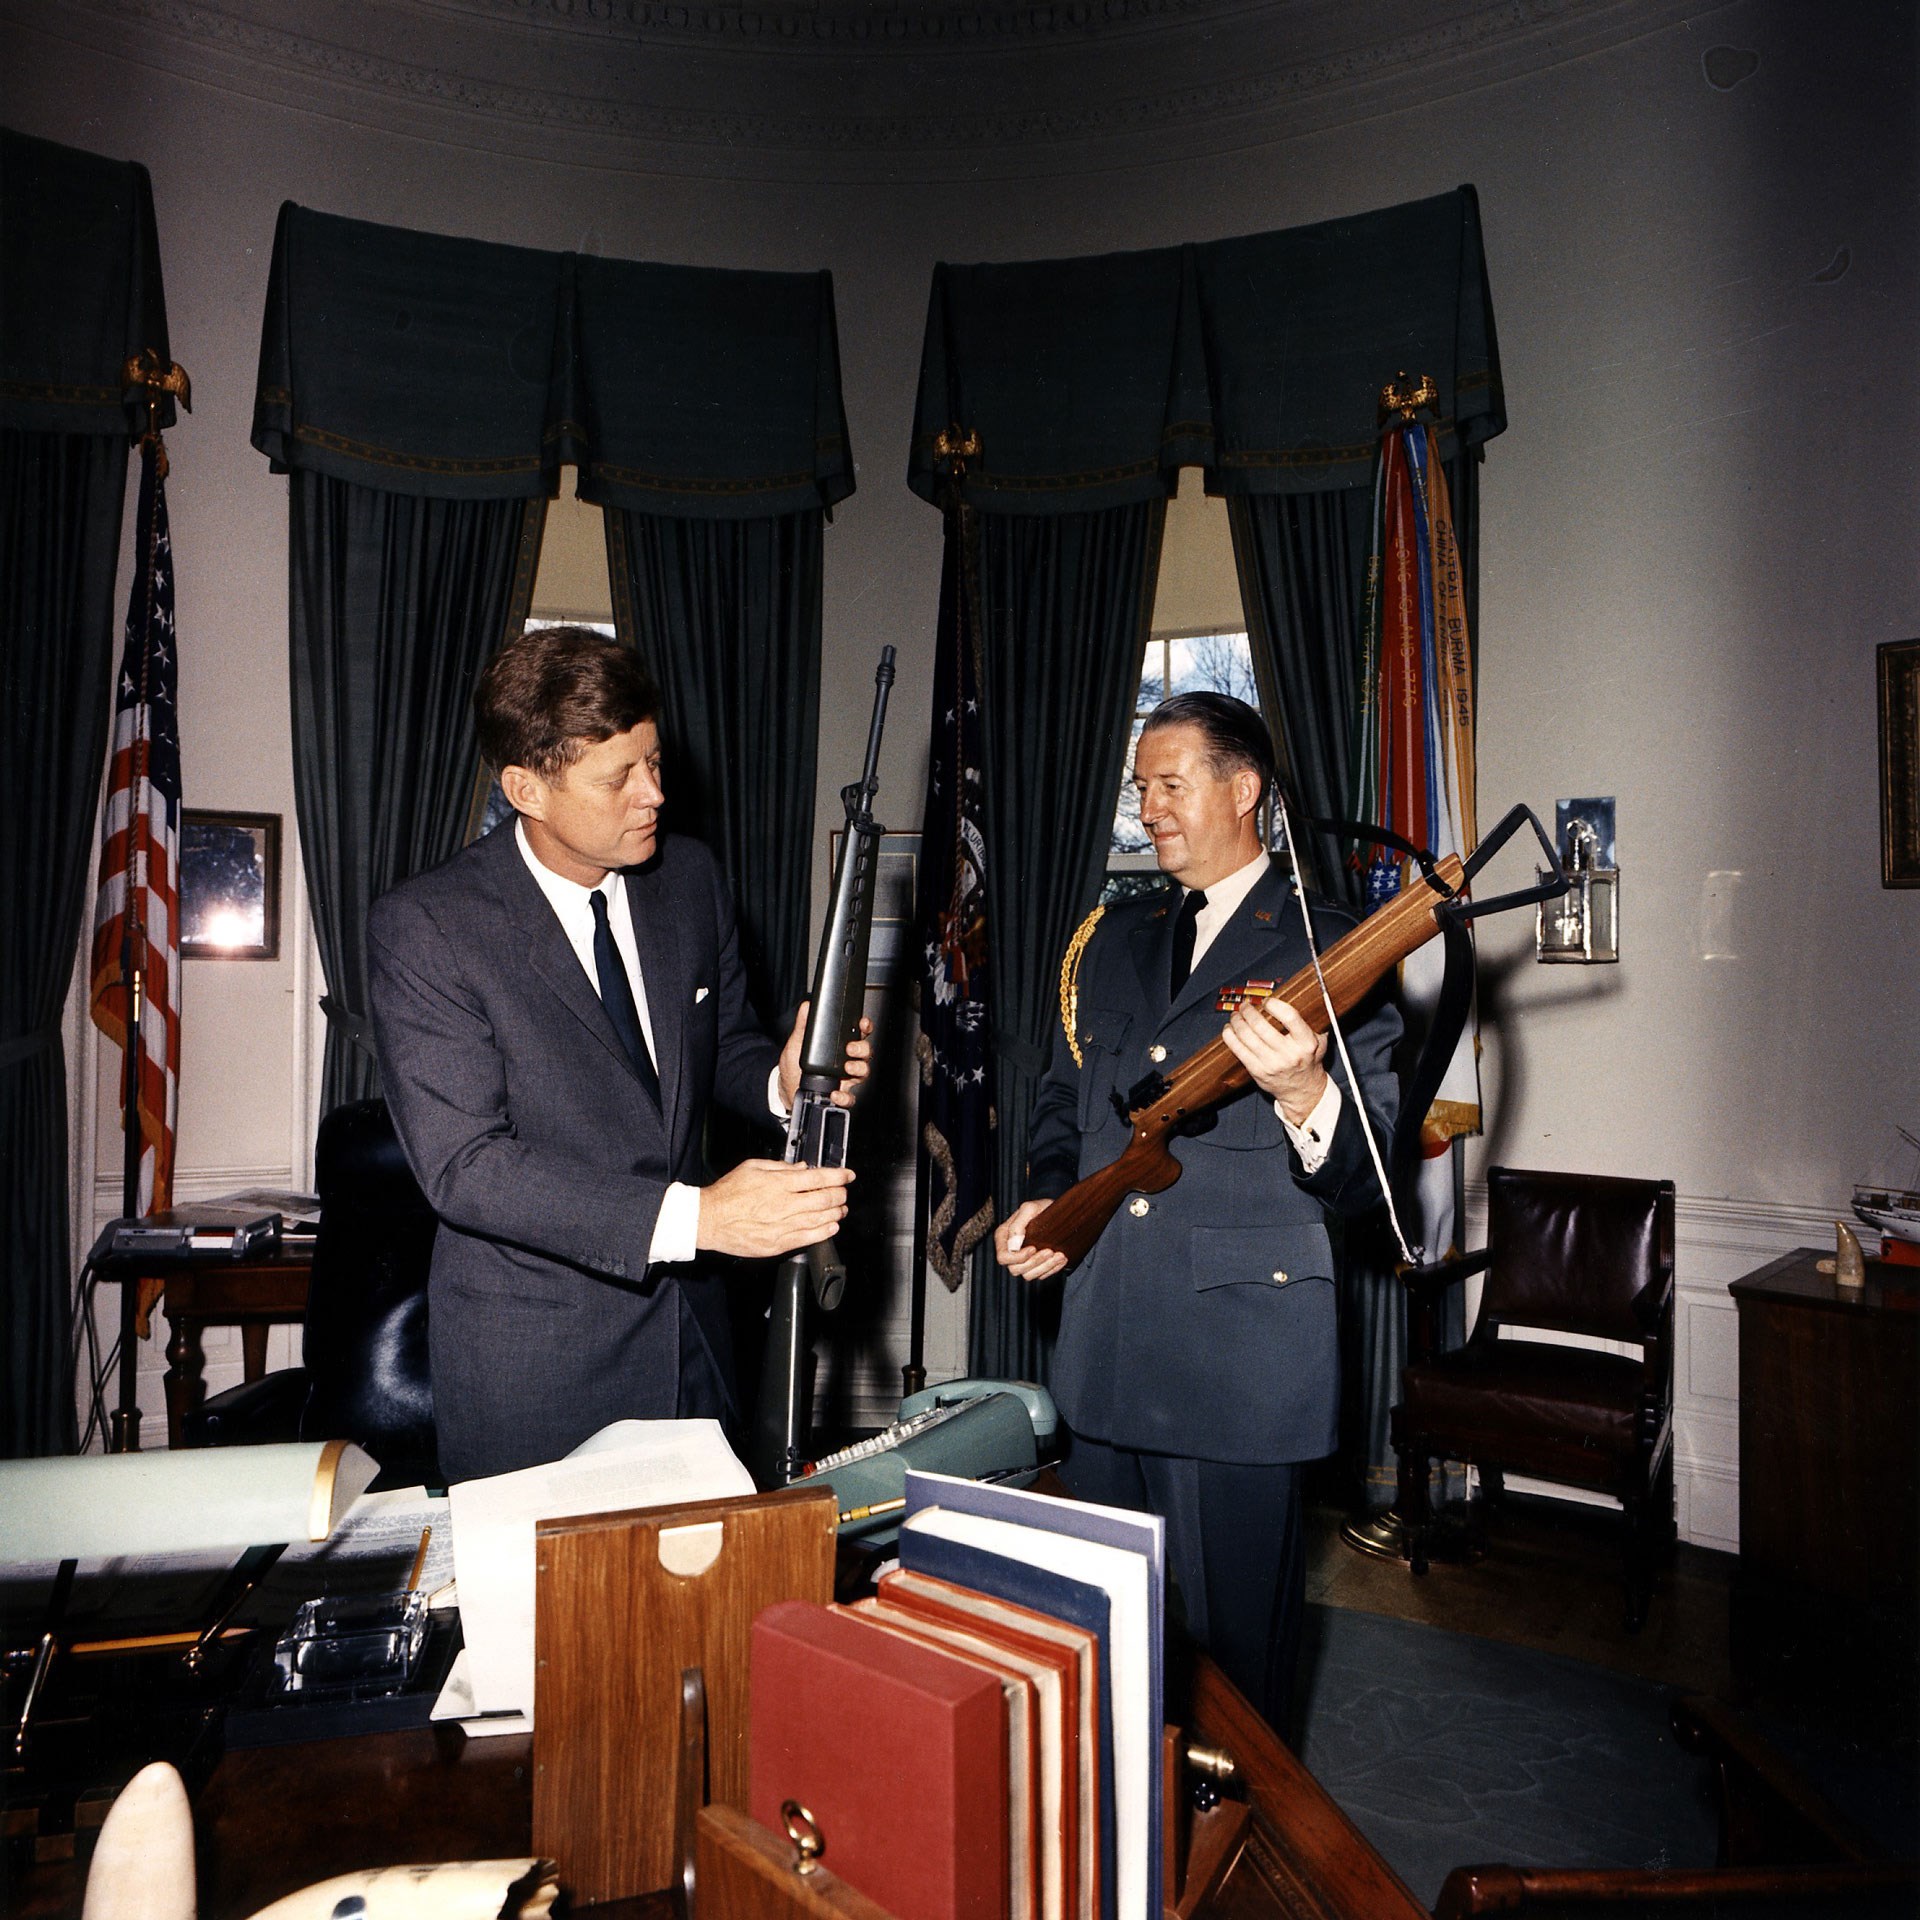 President John F. Kennedy and Military Aide Gen. Chester V. Clifton examine a COLT Model 601 rifle and crossbow in the White House’s Oval Office on April 19, 1963.